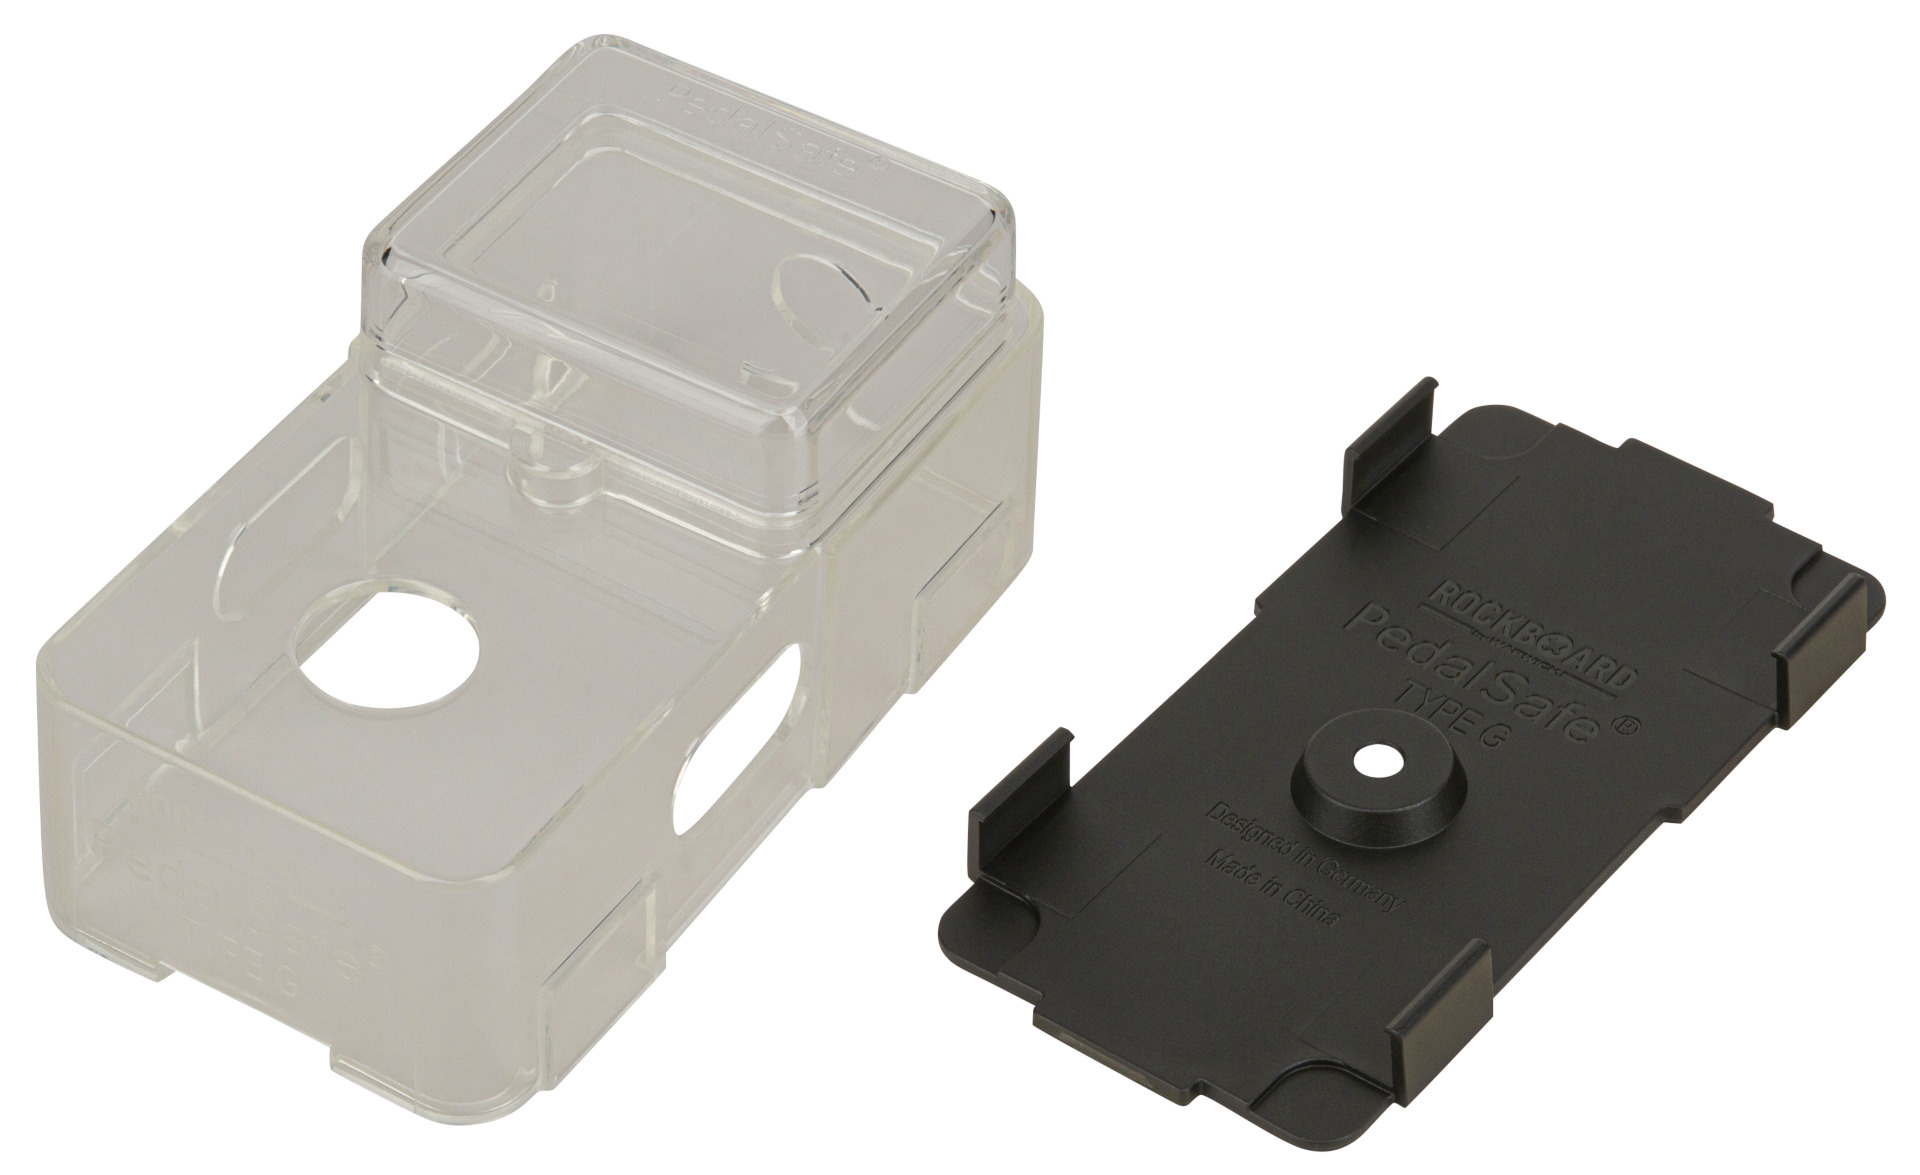 RockBoard PedalSafe Type G - Protective Cover And Universal Mounting Plate For Standard TC Electronic Pedals